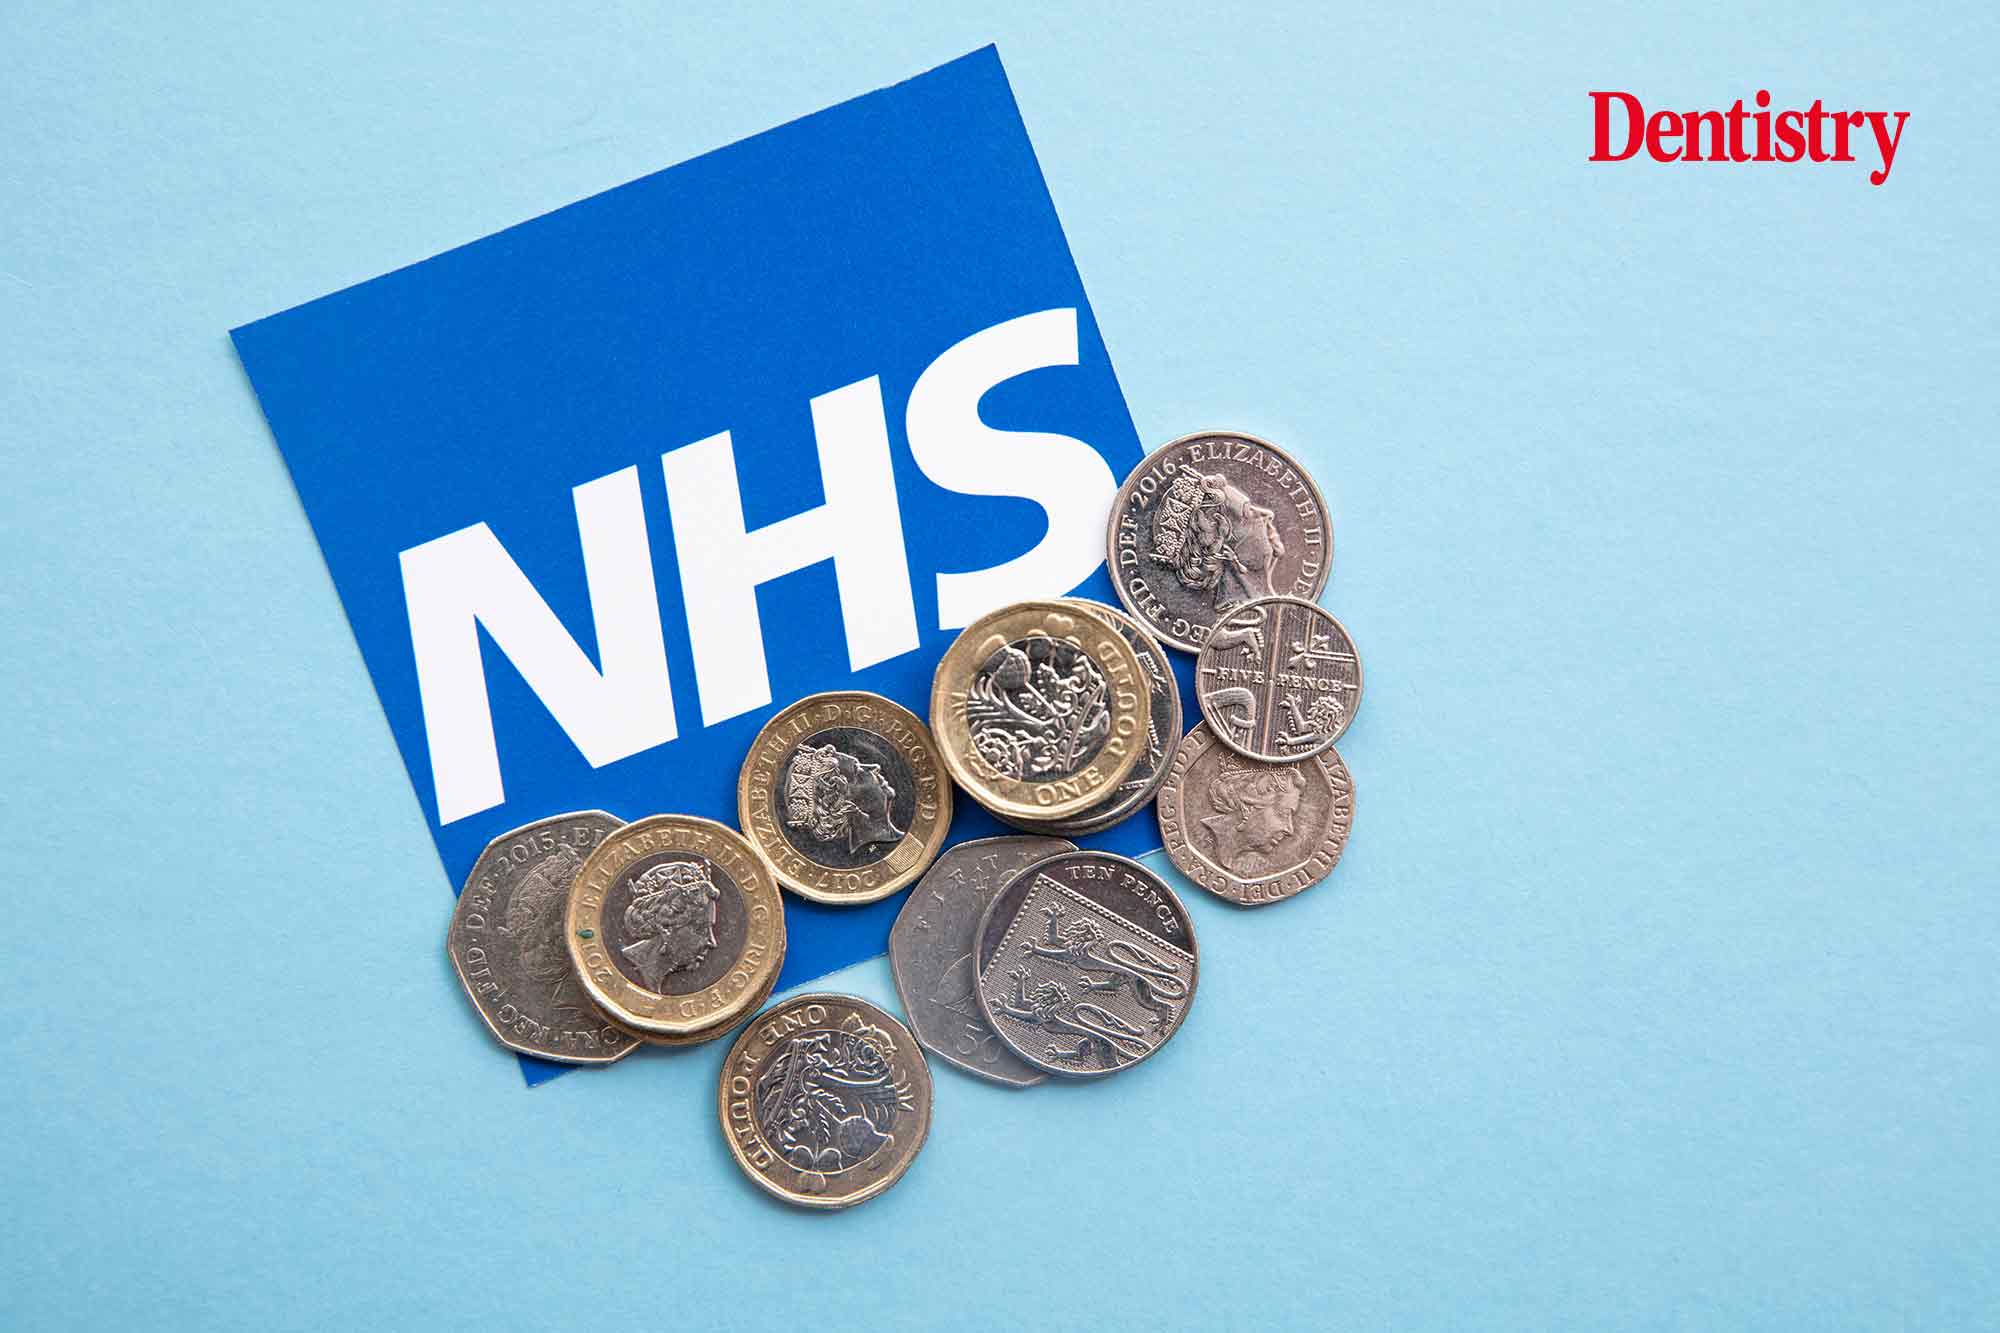 Winter strikes – low pay threatens the future of NHS